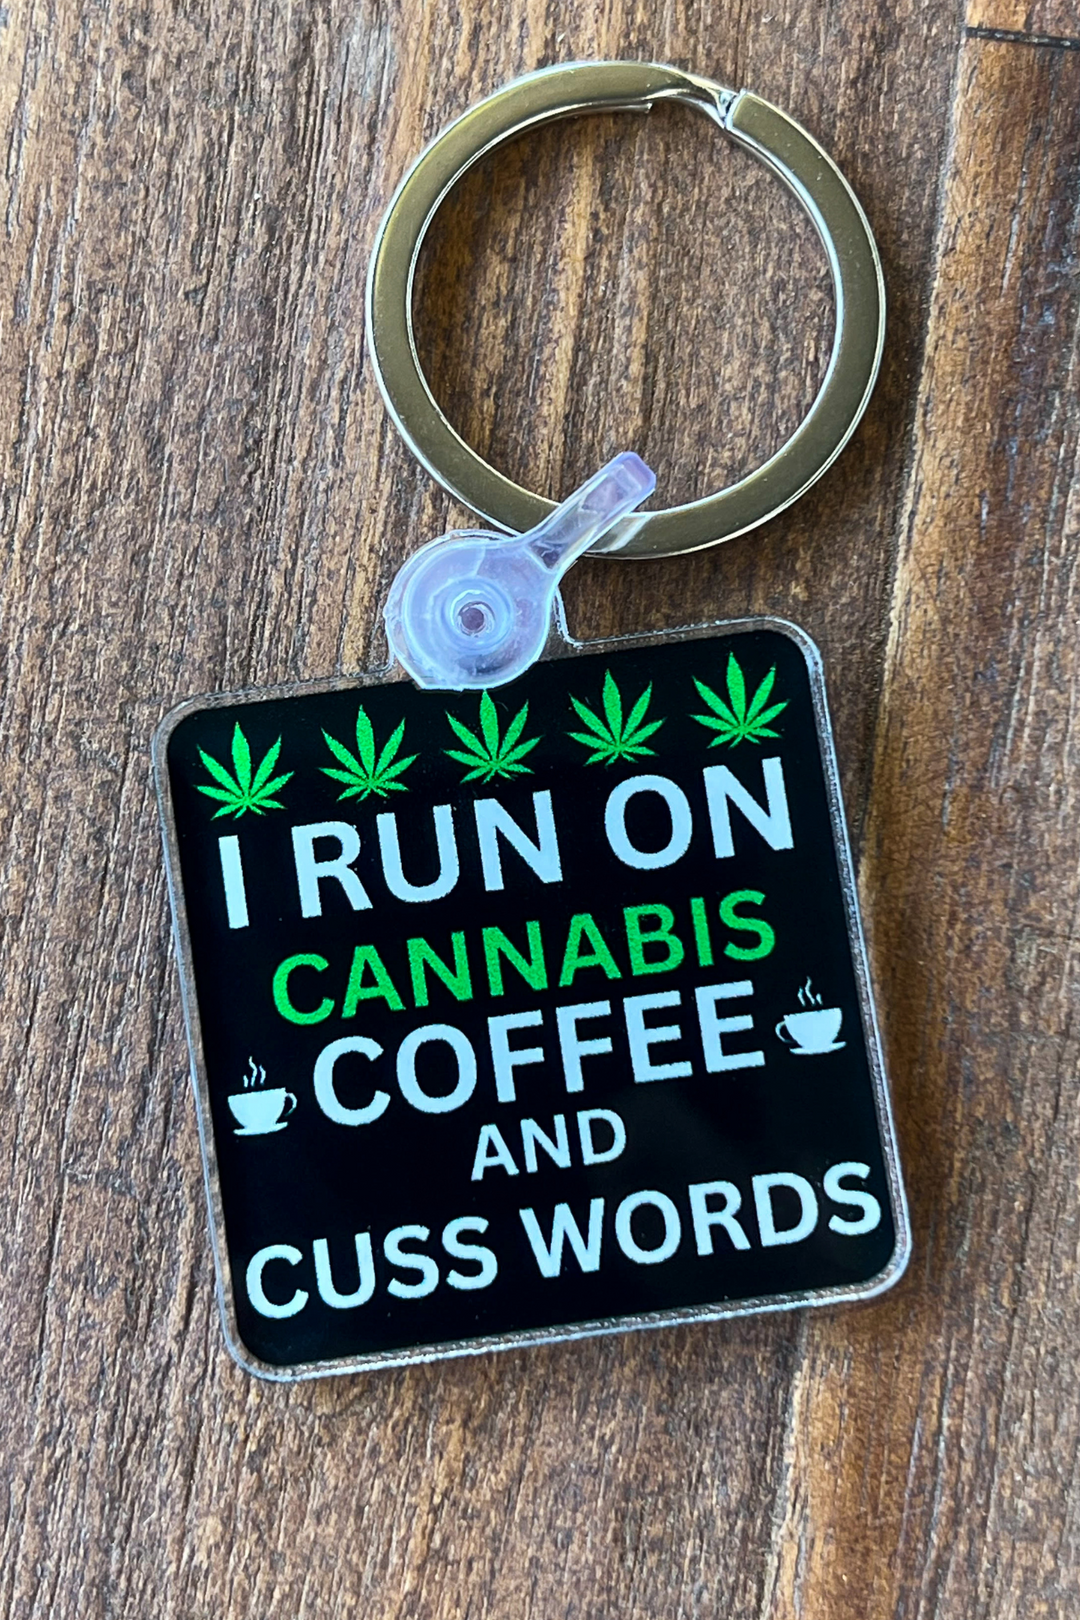 Cannabis and Cusswords Keychain